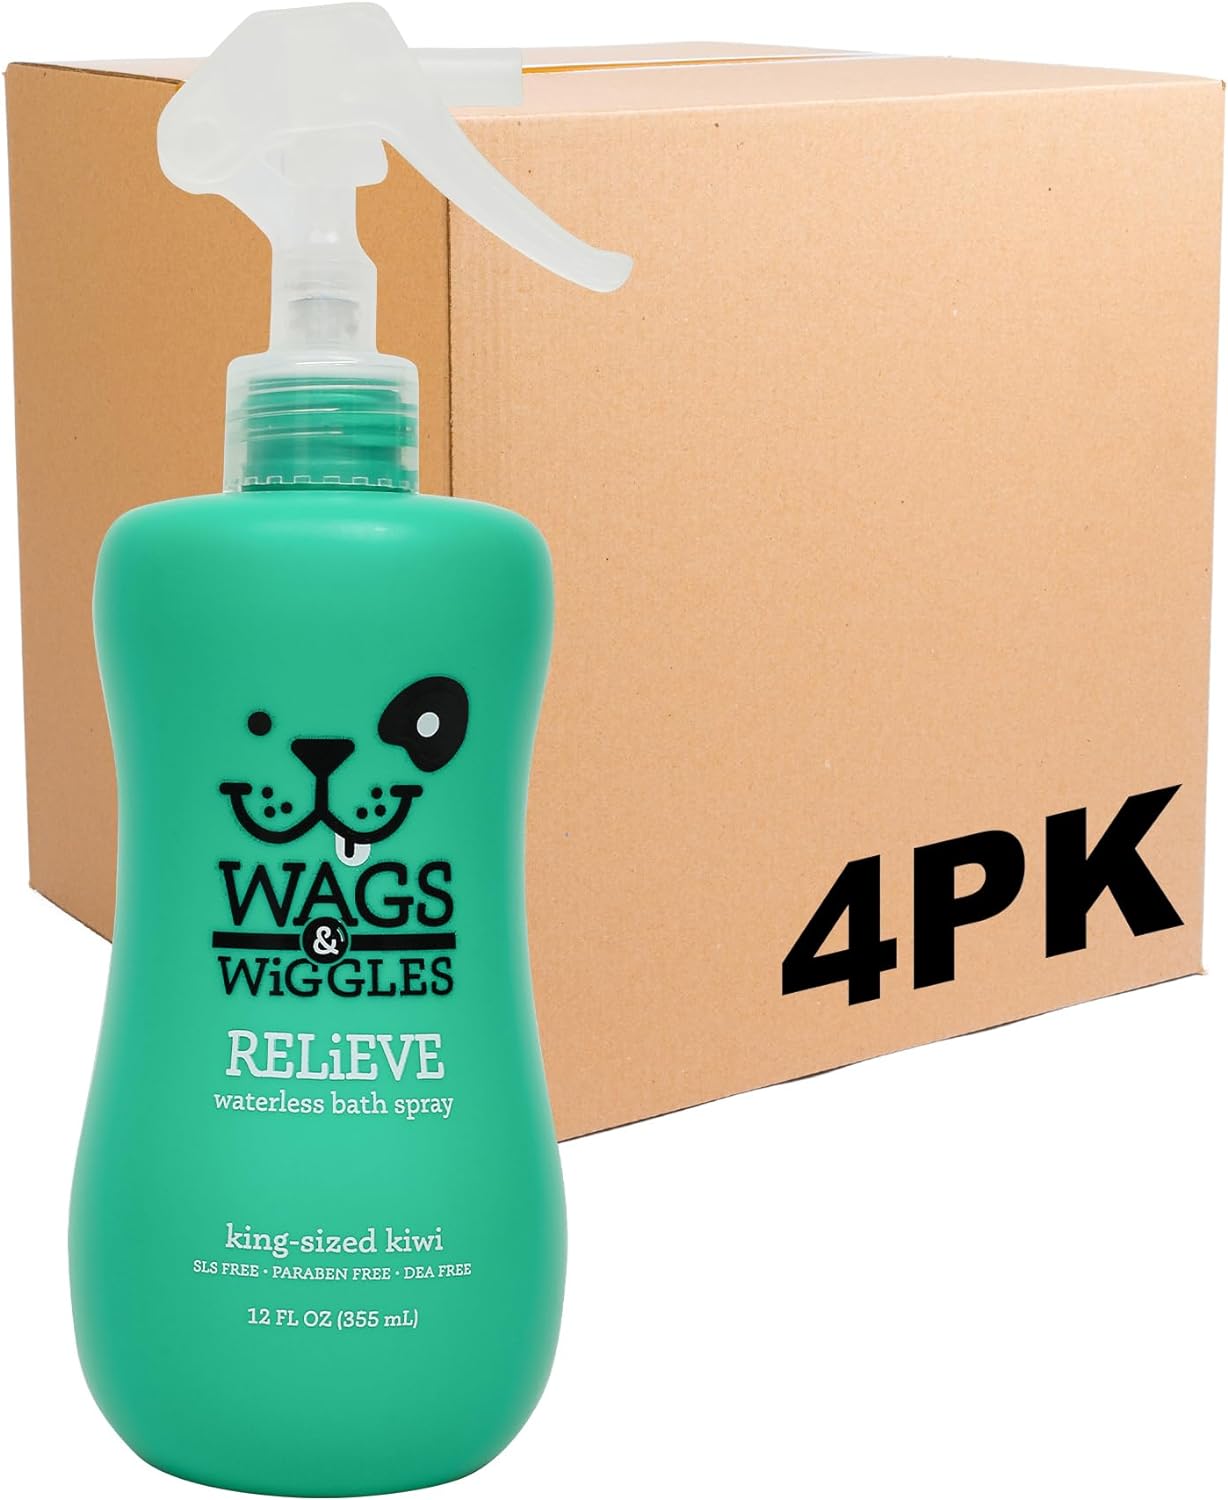 Wags & Wiggles Relieve Anti-Itch Spray for Dogs | Waterless Dry Shampoo for Dogs with Dry, Itchy, Or Sensitive Skin | Kiwi Scent Your Dog Will Love, Anti-Itch Spray - Kiwi, 12 Ounces - 4 Pack